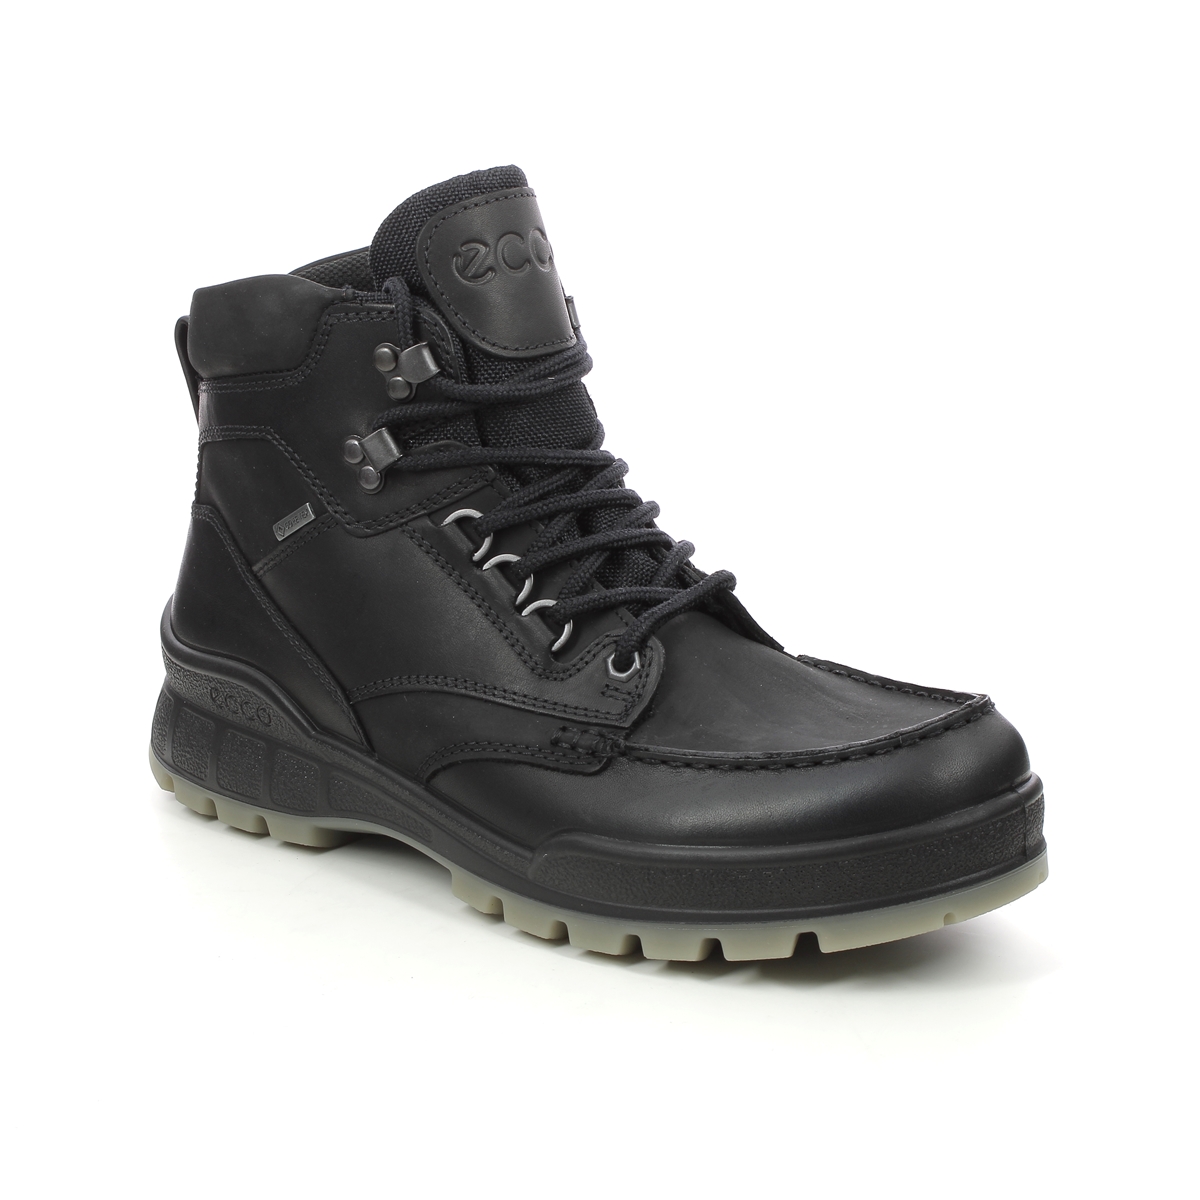 ECCO Track 25 Boot Gtx Black leather Mens Outdoor Walking Boots 831704-51052 in a Plain Leather in Size 41